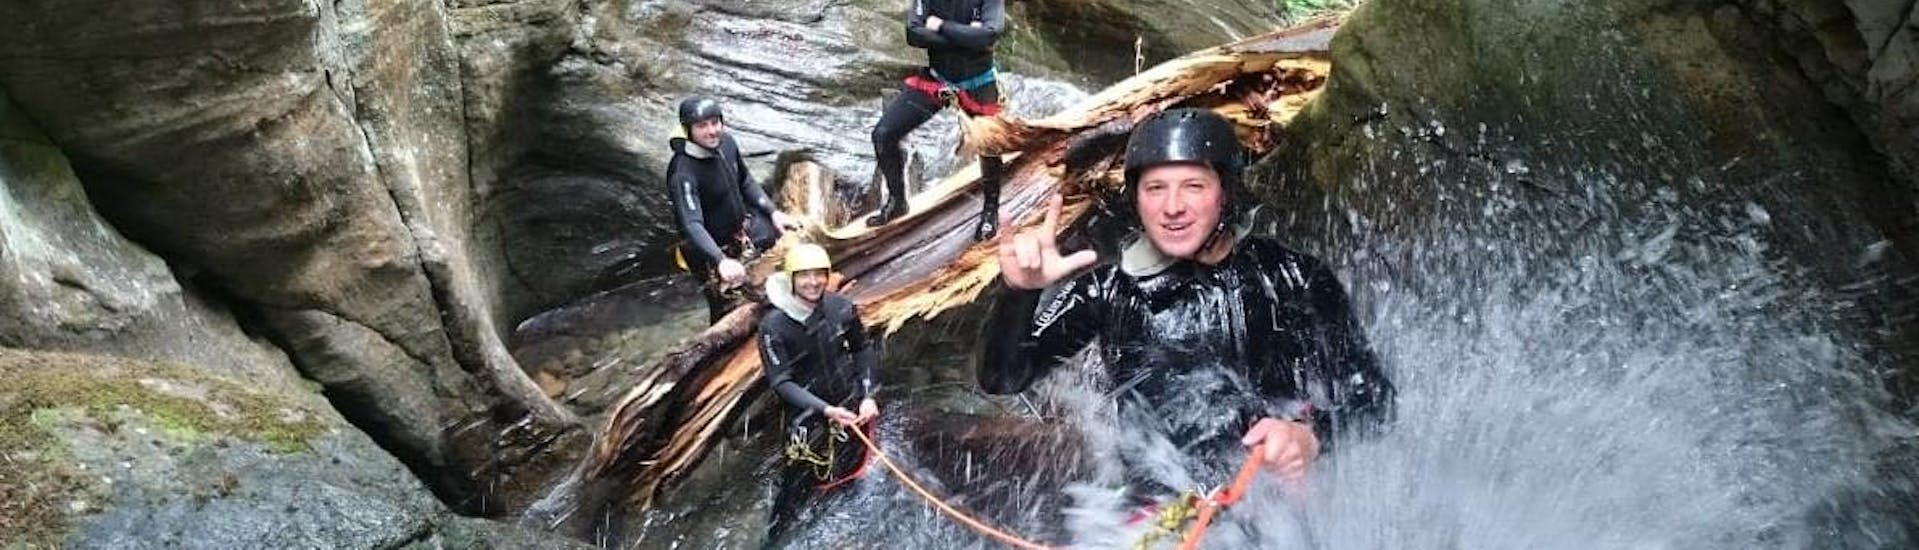 An advanced group of the Sporterlebnis Camp Pristavec Obervellach canyoning in the Wunzenschlucht.